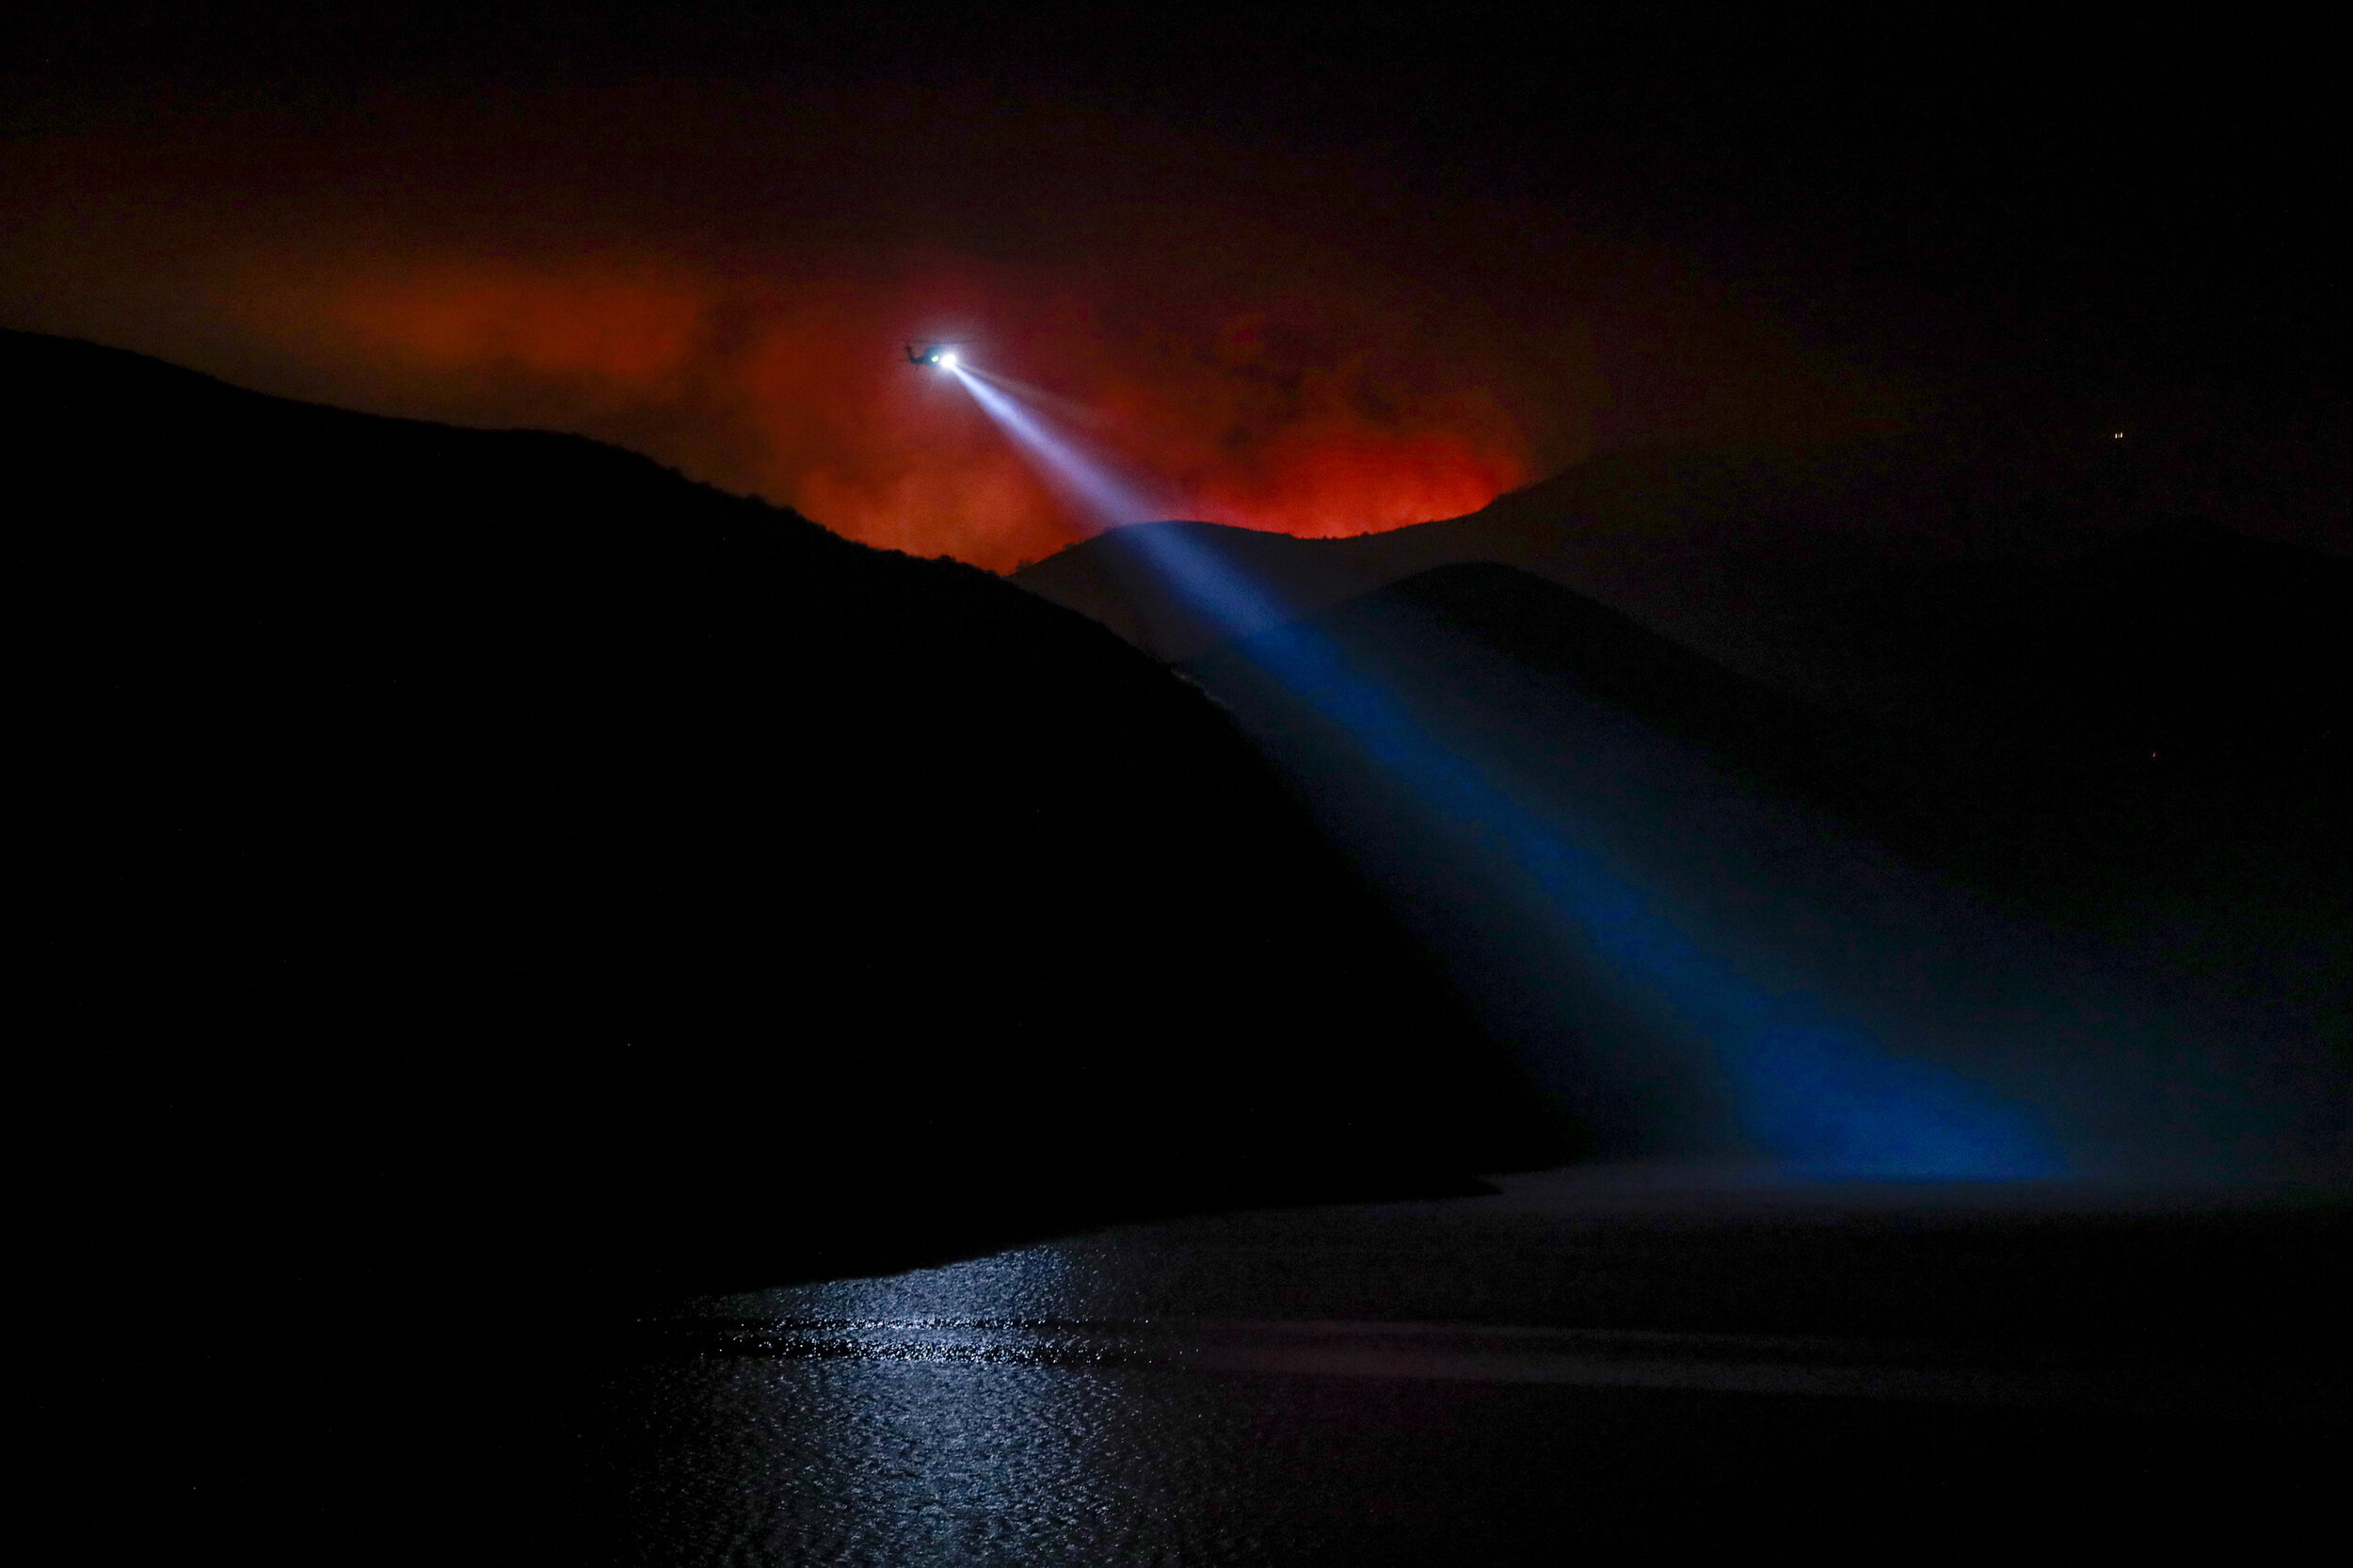  The Holser Fire consumed more than 1,000 acres by the end of its first day just East of Lake Piru. the end of the year, 9,639 fires had burned 4,177,856 acres, more than 4% of California’s roughly 100 million acres of land, making 2020 the largest w